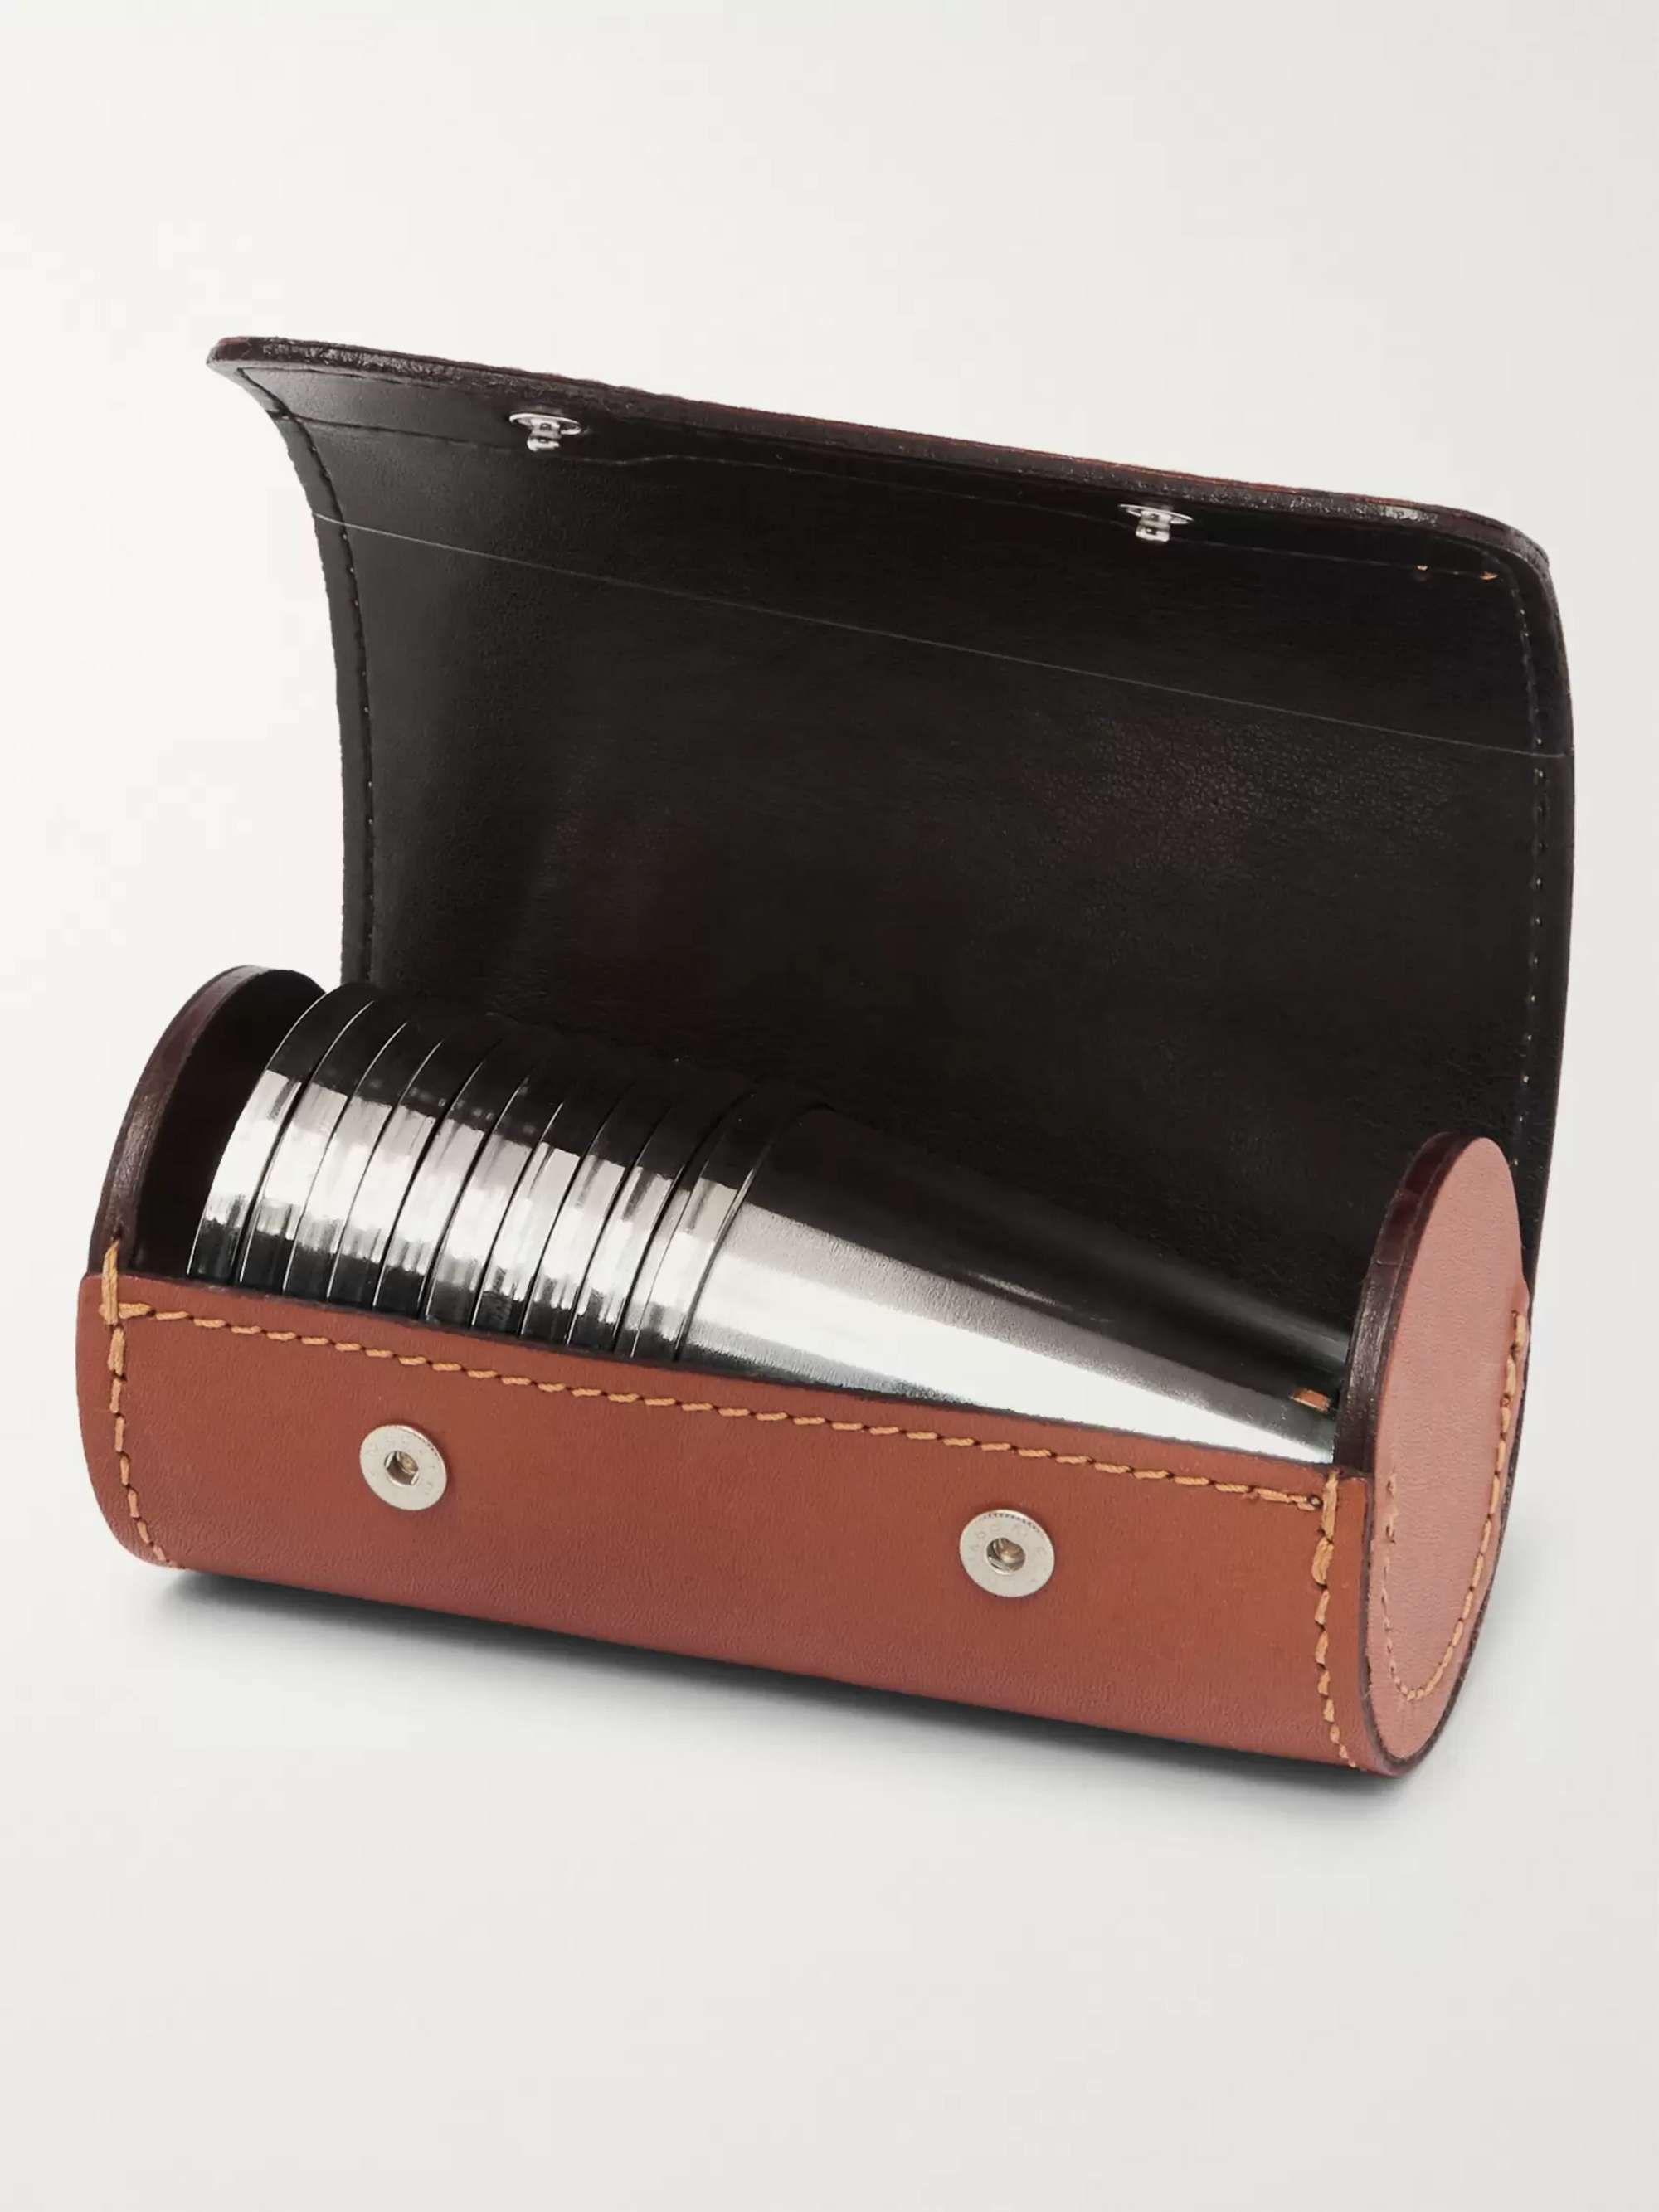 PURDEY Leather Case and Stainless Steel Cup Set